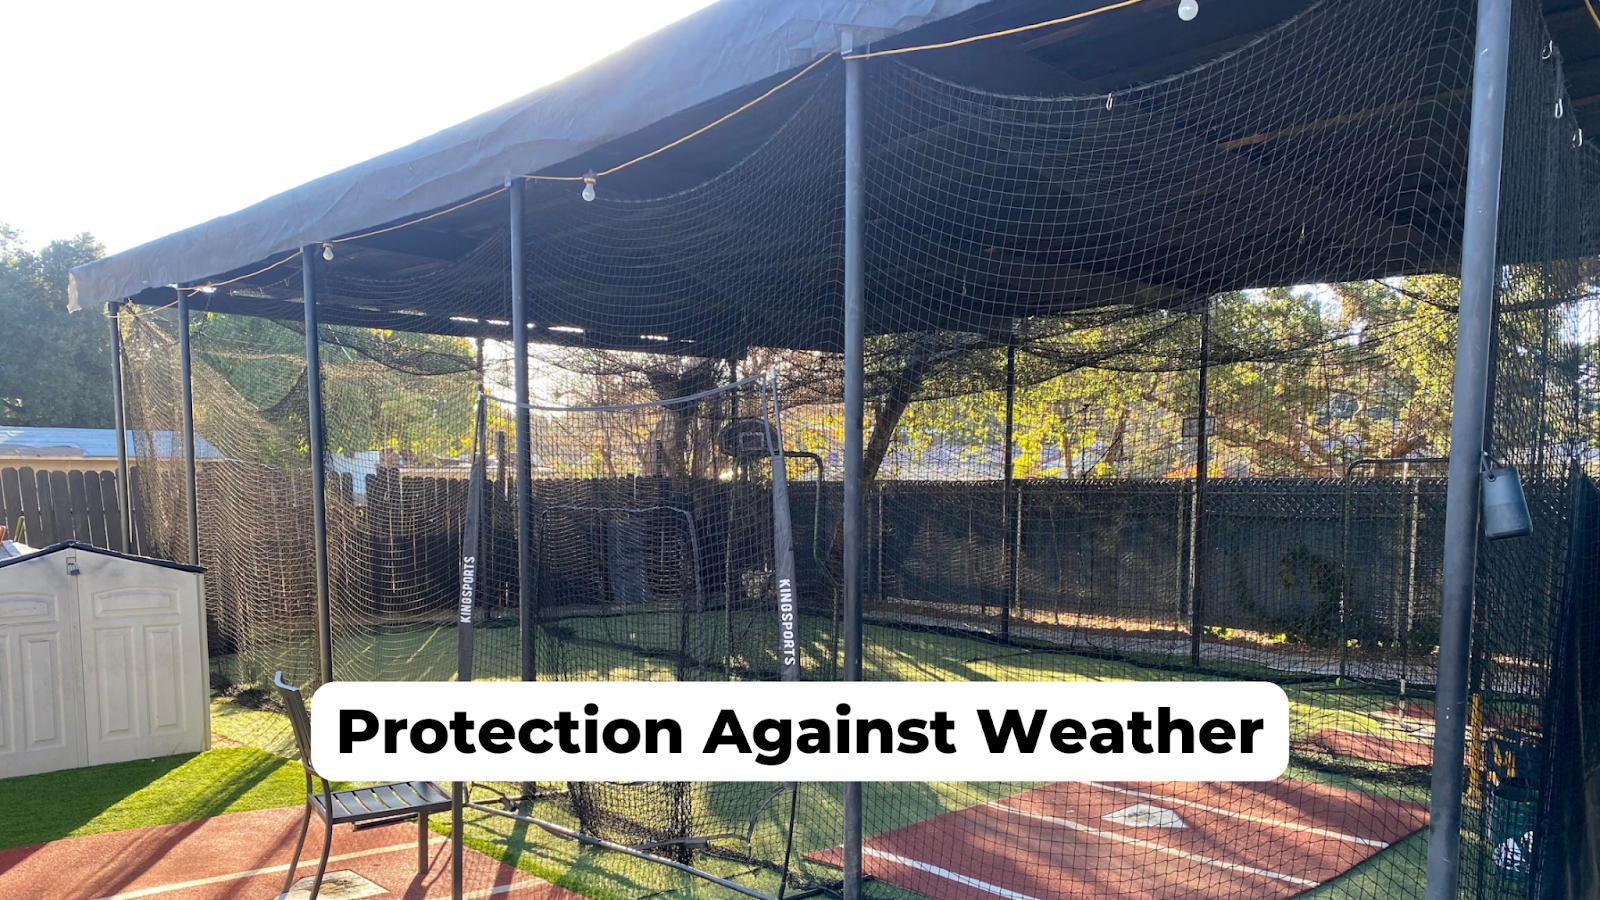 An image of backyard batting cage with sunshade installed